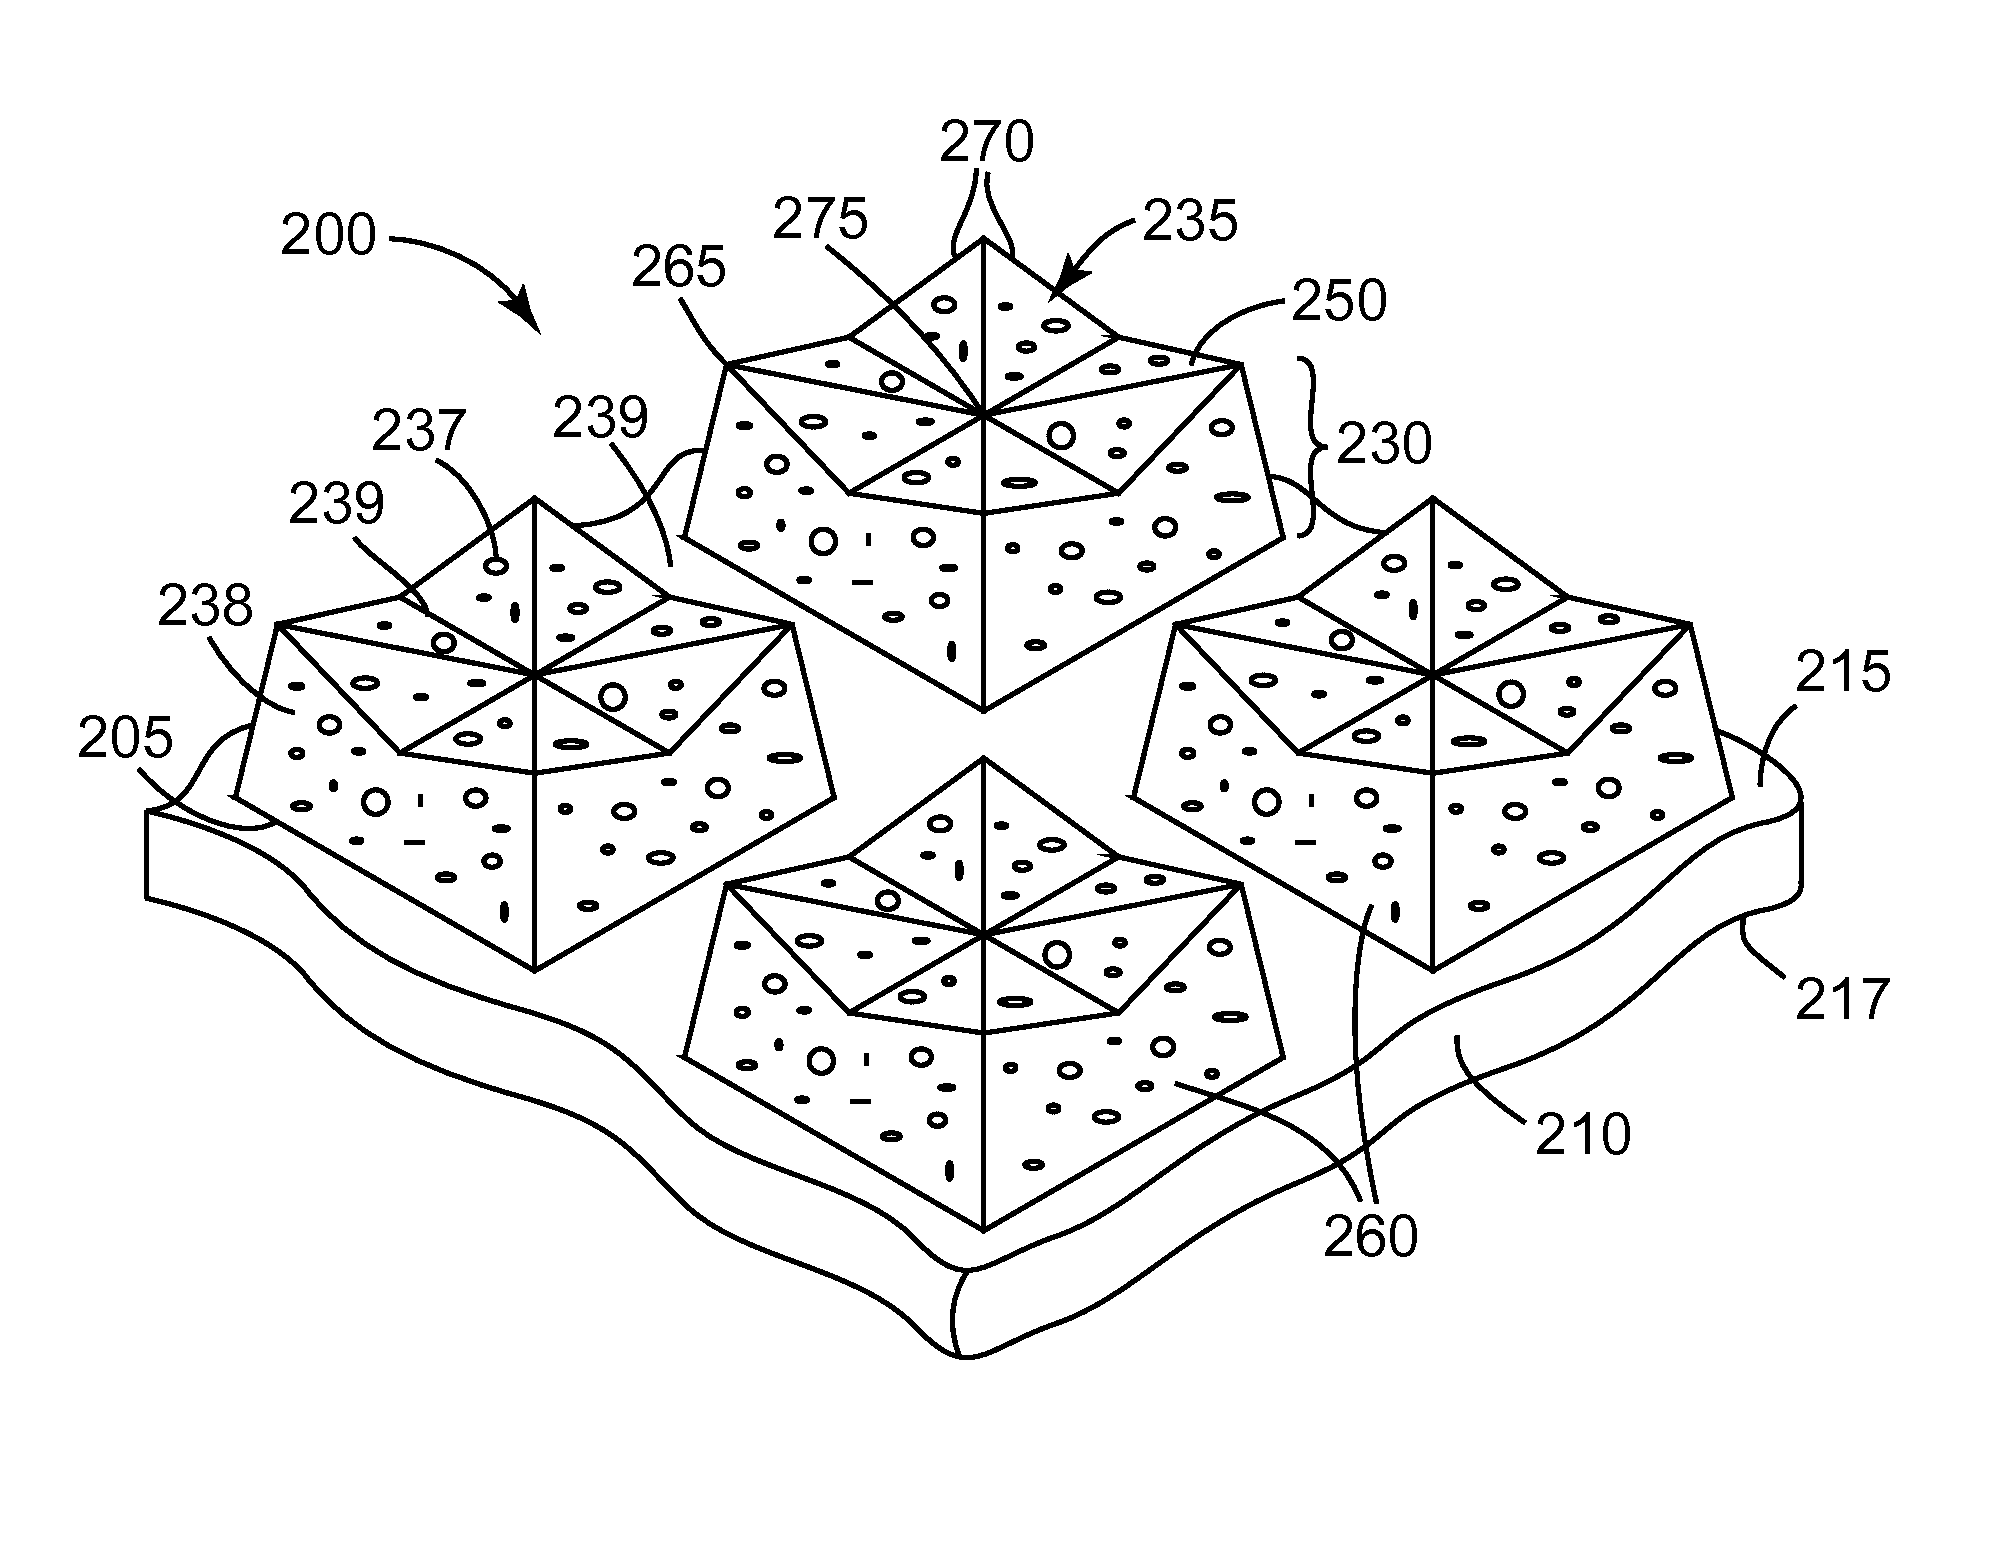 Structured abrasive article and method of using the same